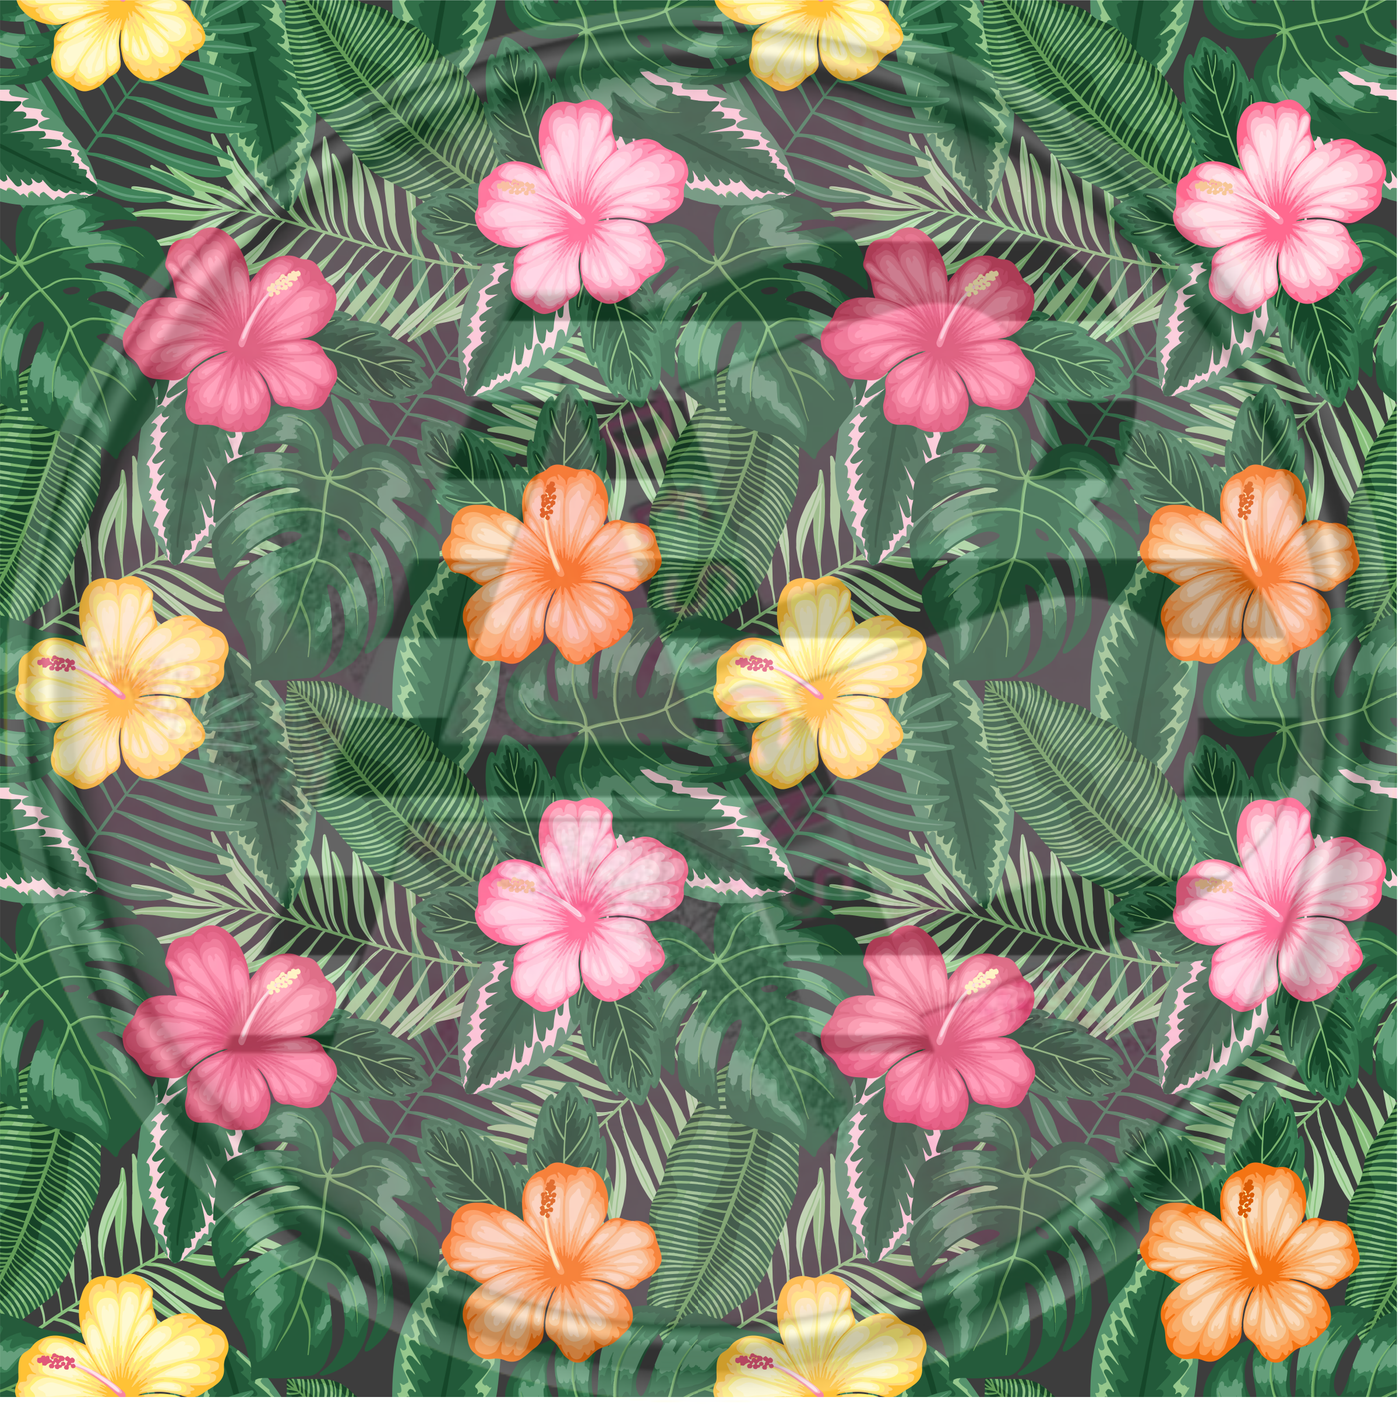 Adhesive Patterned Vinyl - Tropical Exotic Floral 36